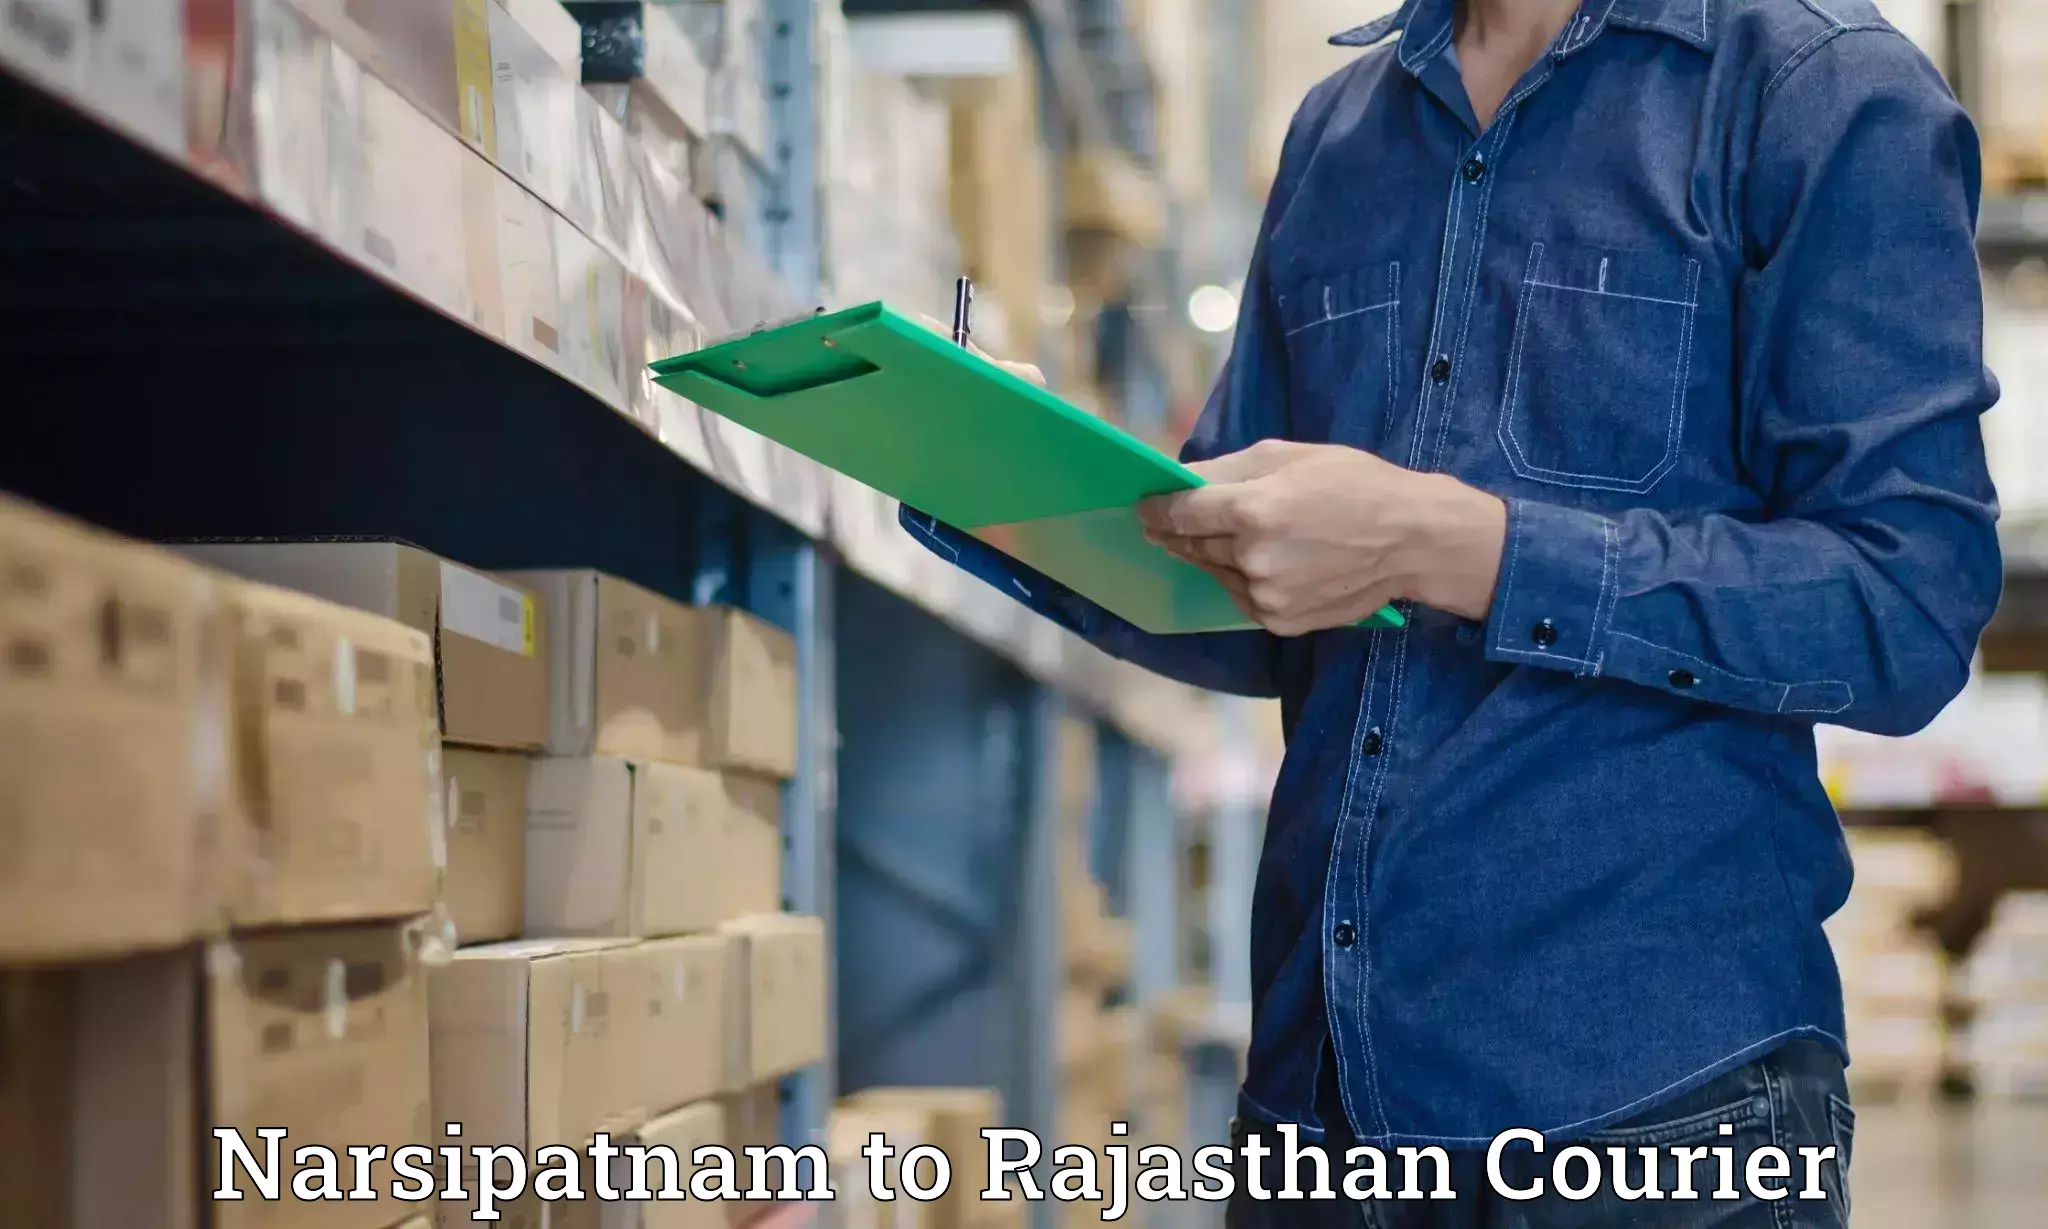 Courier service innovation Narsipatnam to Rajasthan